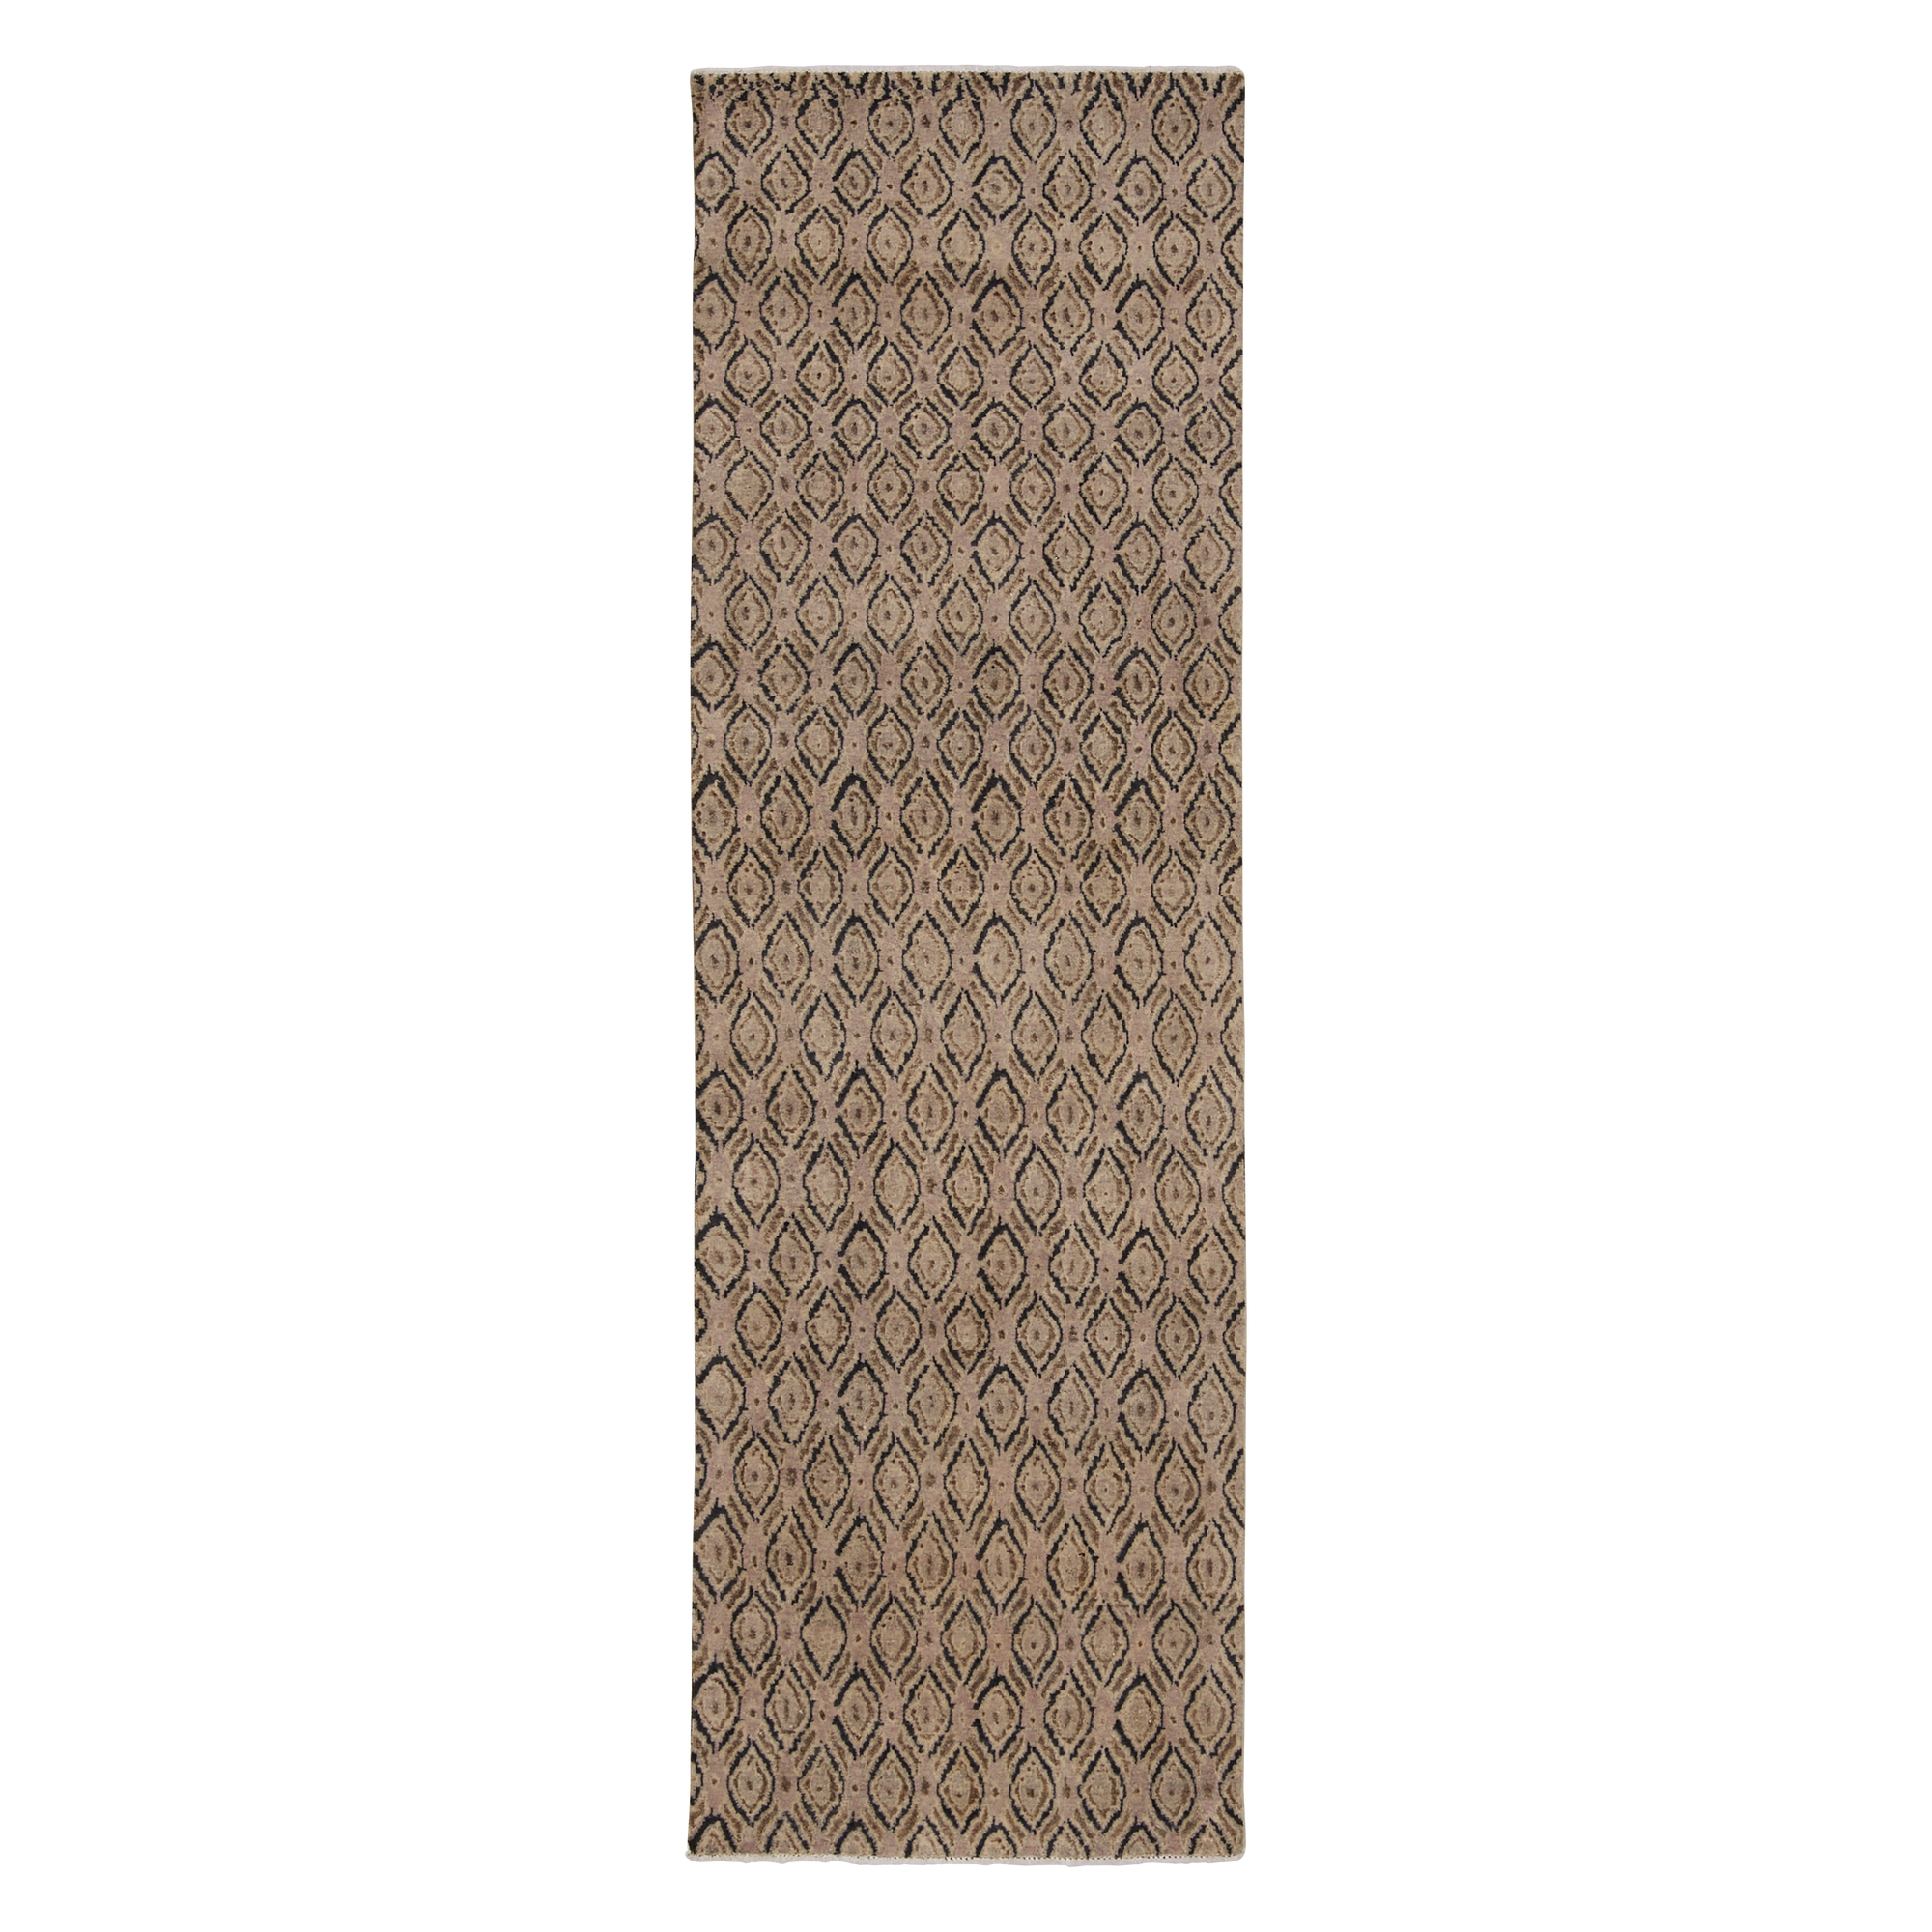 Each rug in Elte's Modern Collection tells a unique story.